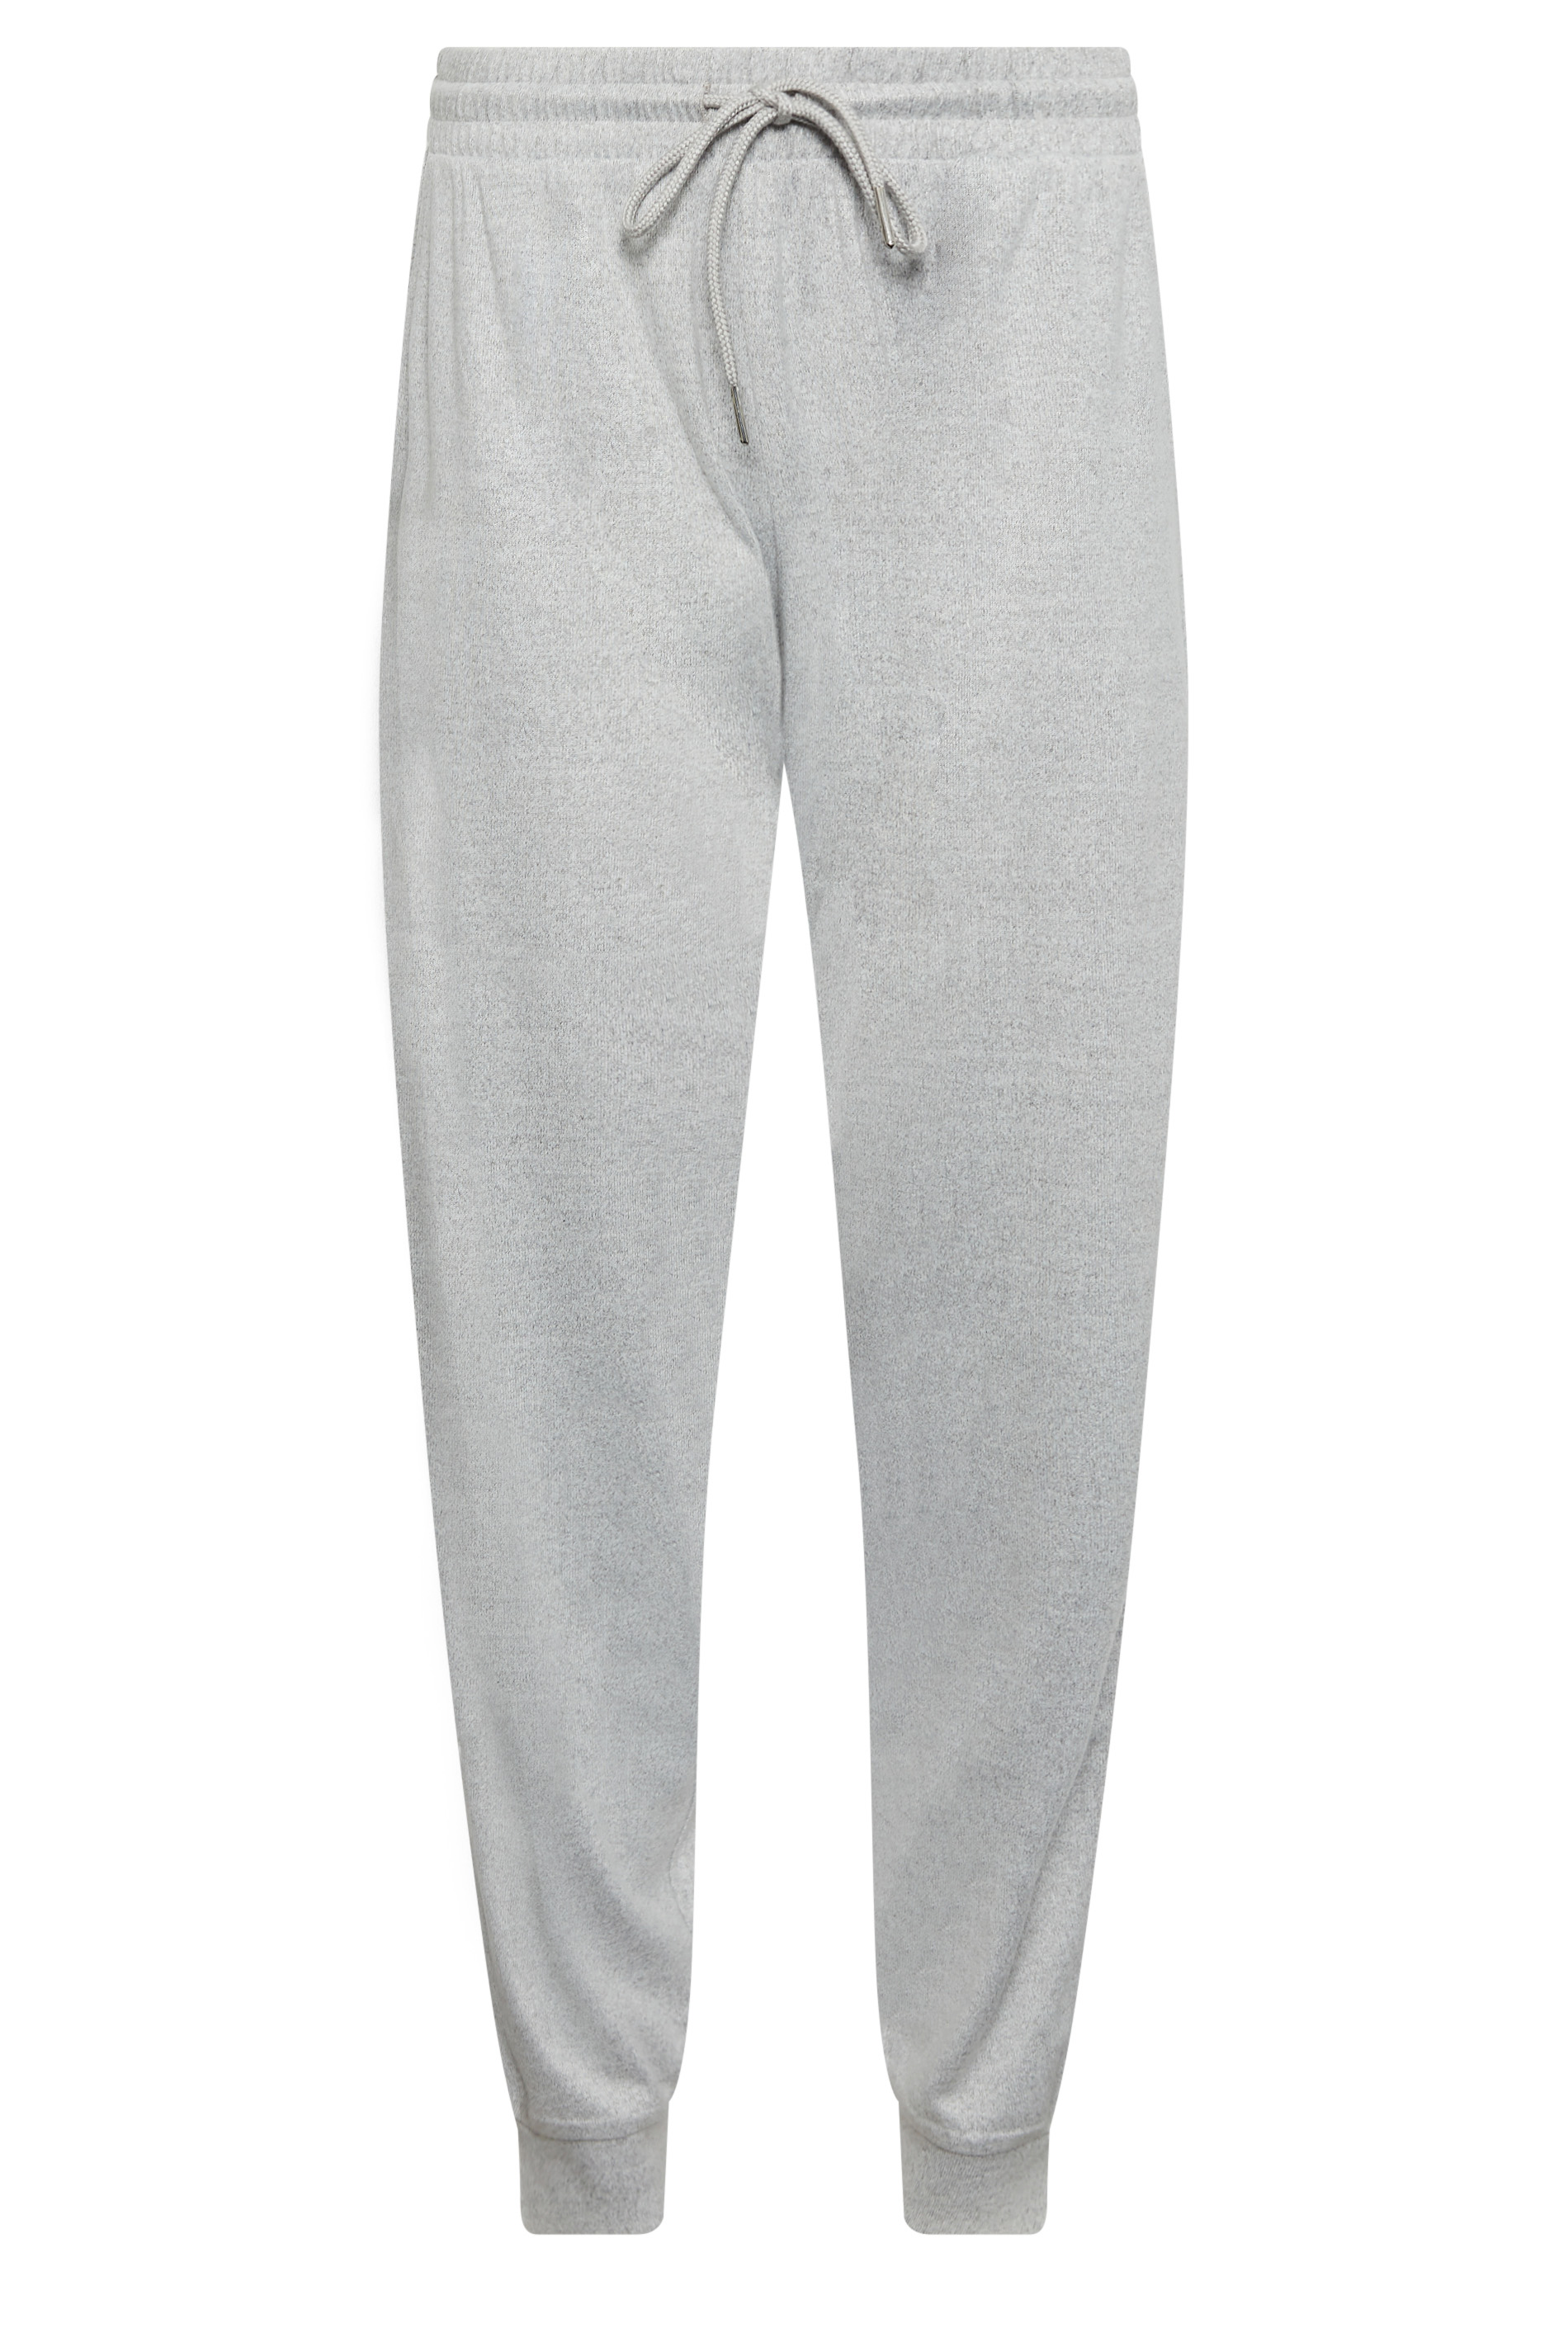 M&Co Grey Marl Soft Touch Lounge Joggers